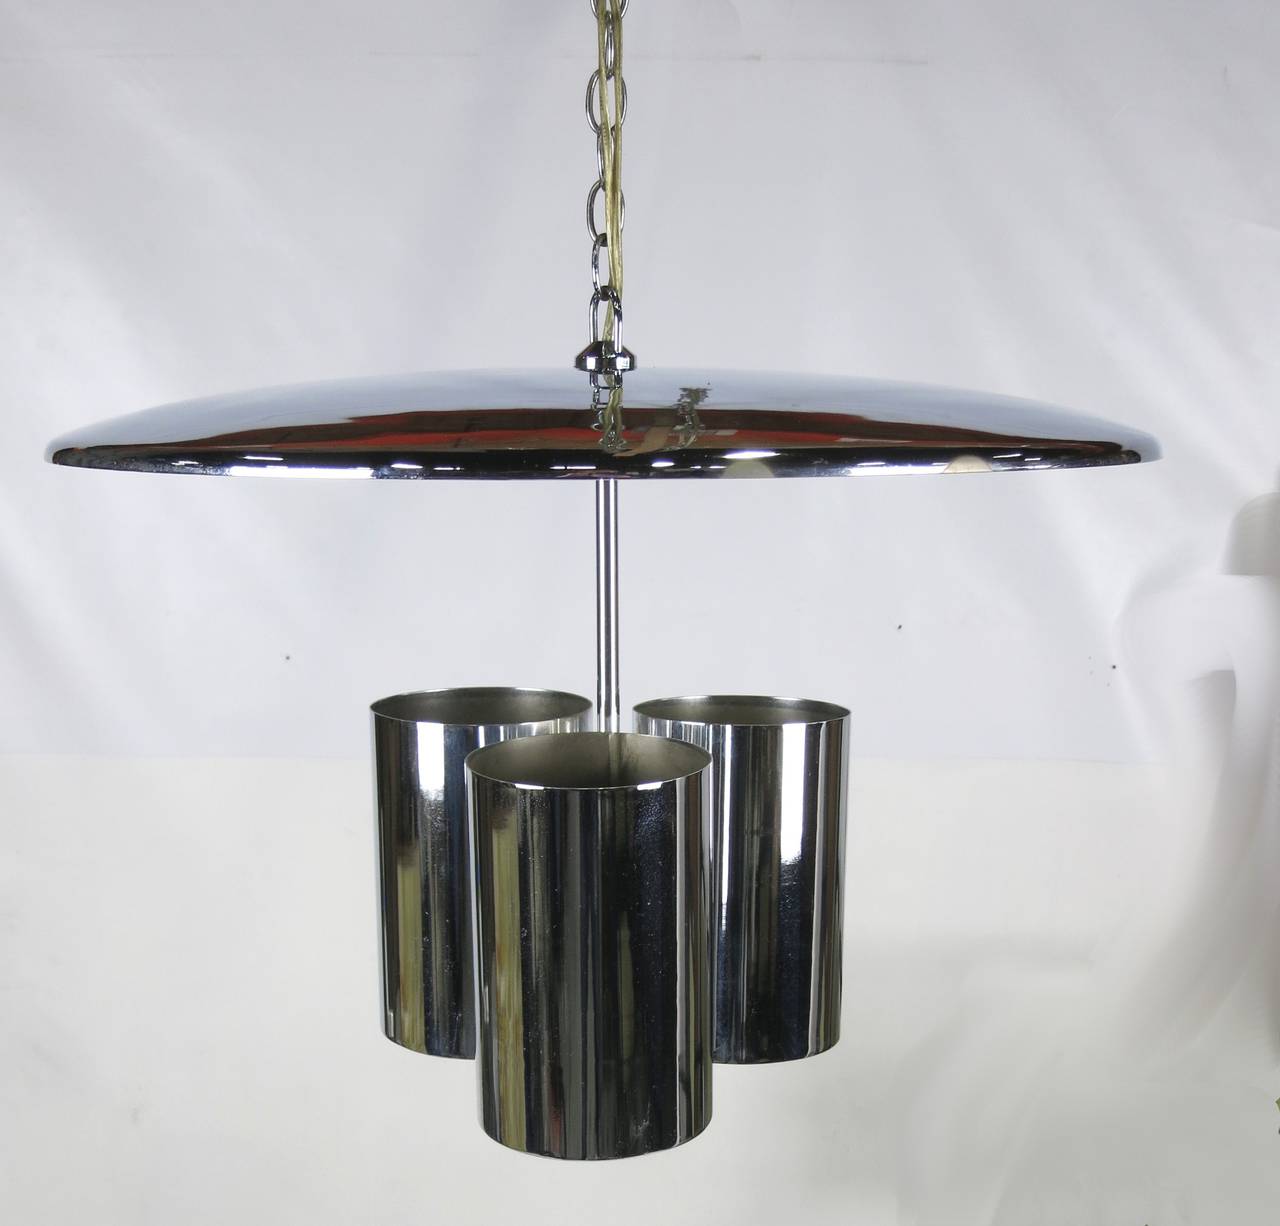 Handsome chrome saucer chandelier with three uplights that illuminate the white underside of the shade for a dramatic indirect light. Comes with 10' of  original chrome chain.  It has the feel of a George Nelson 